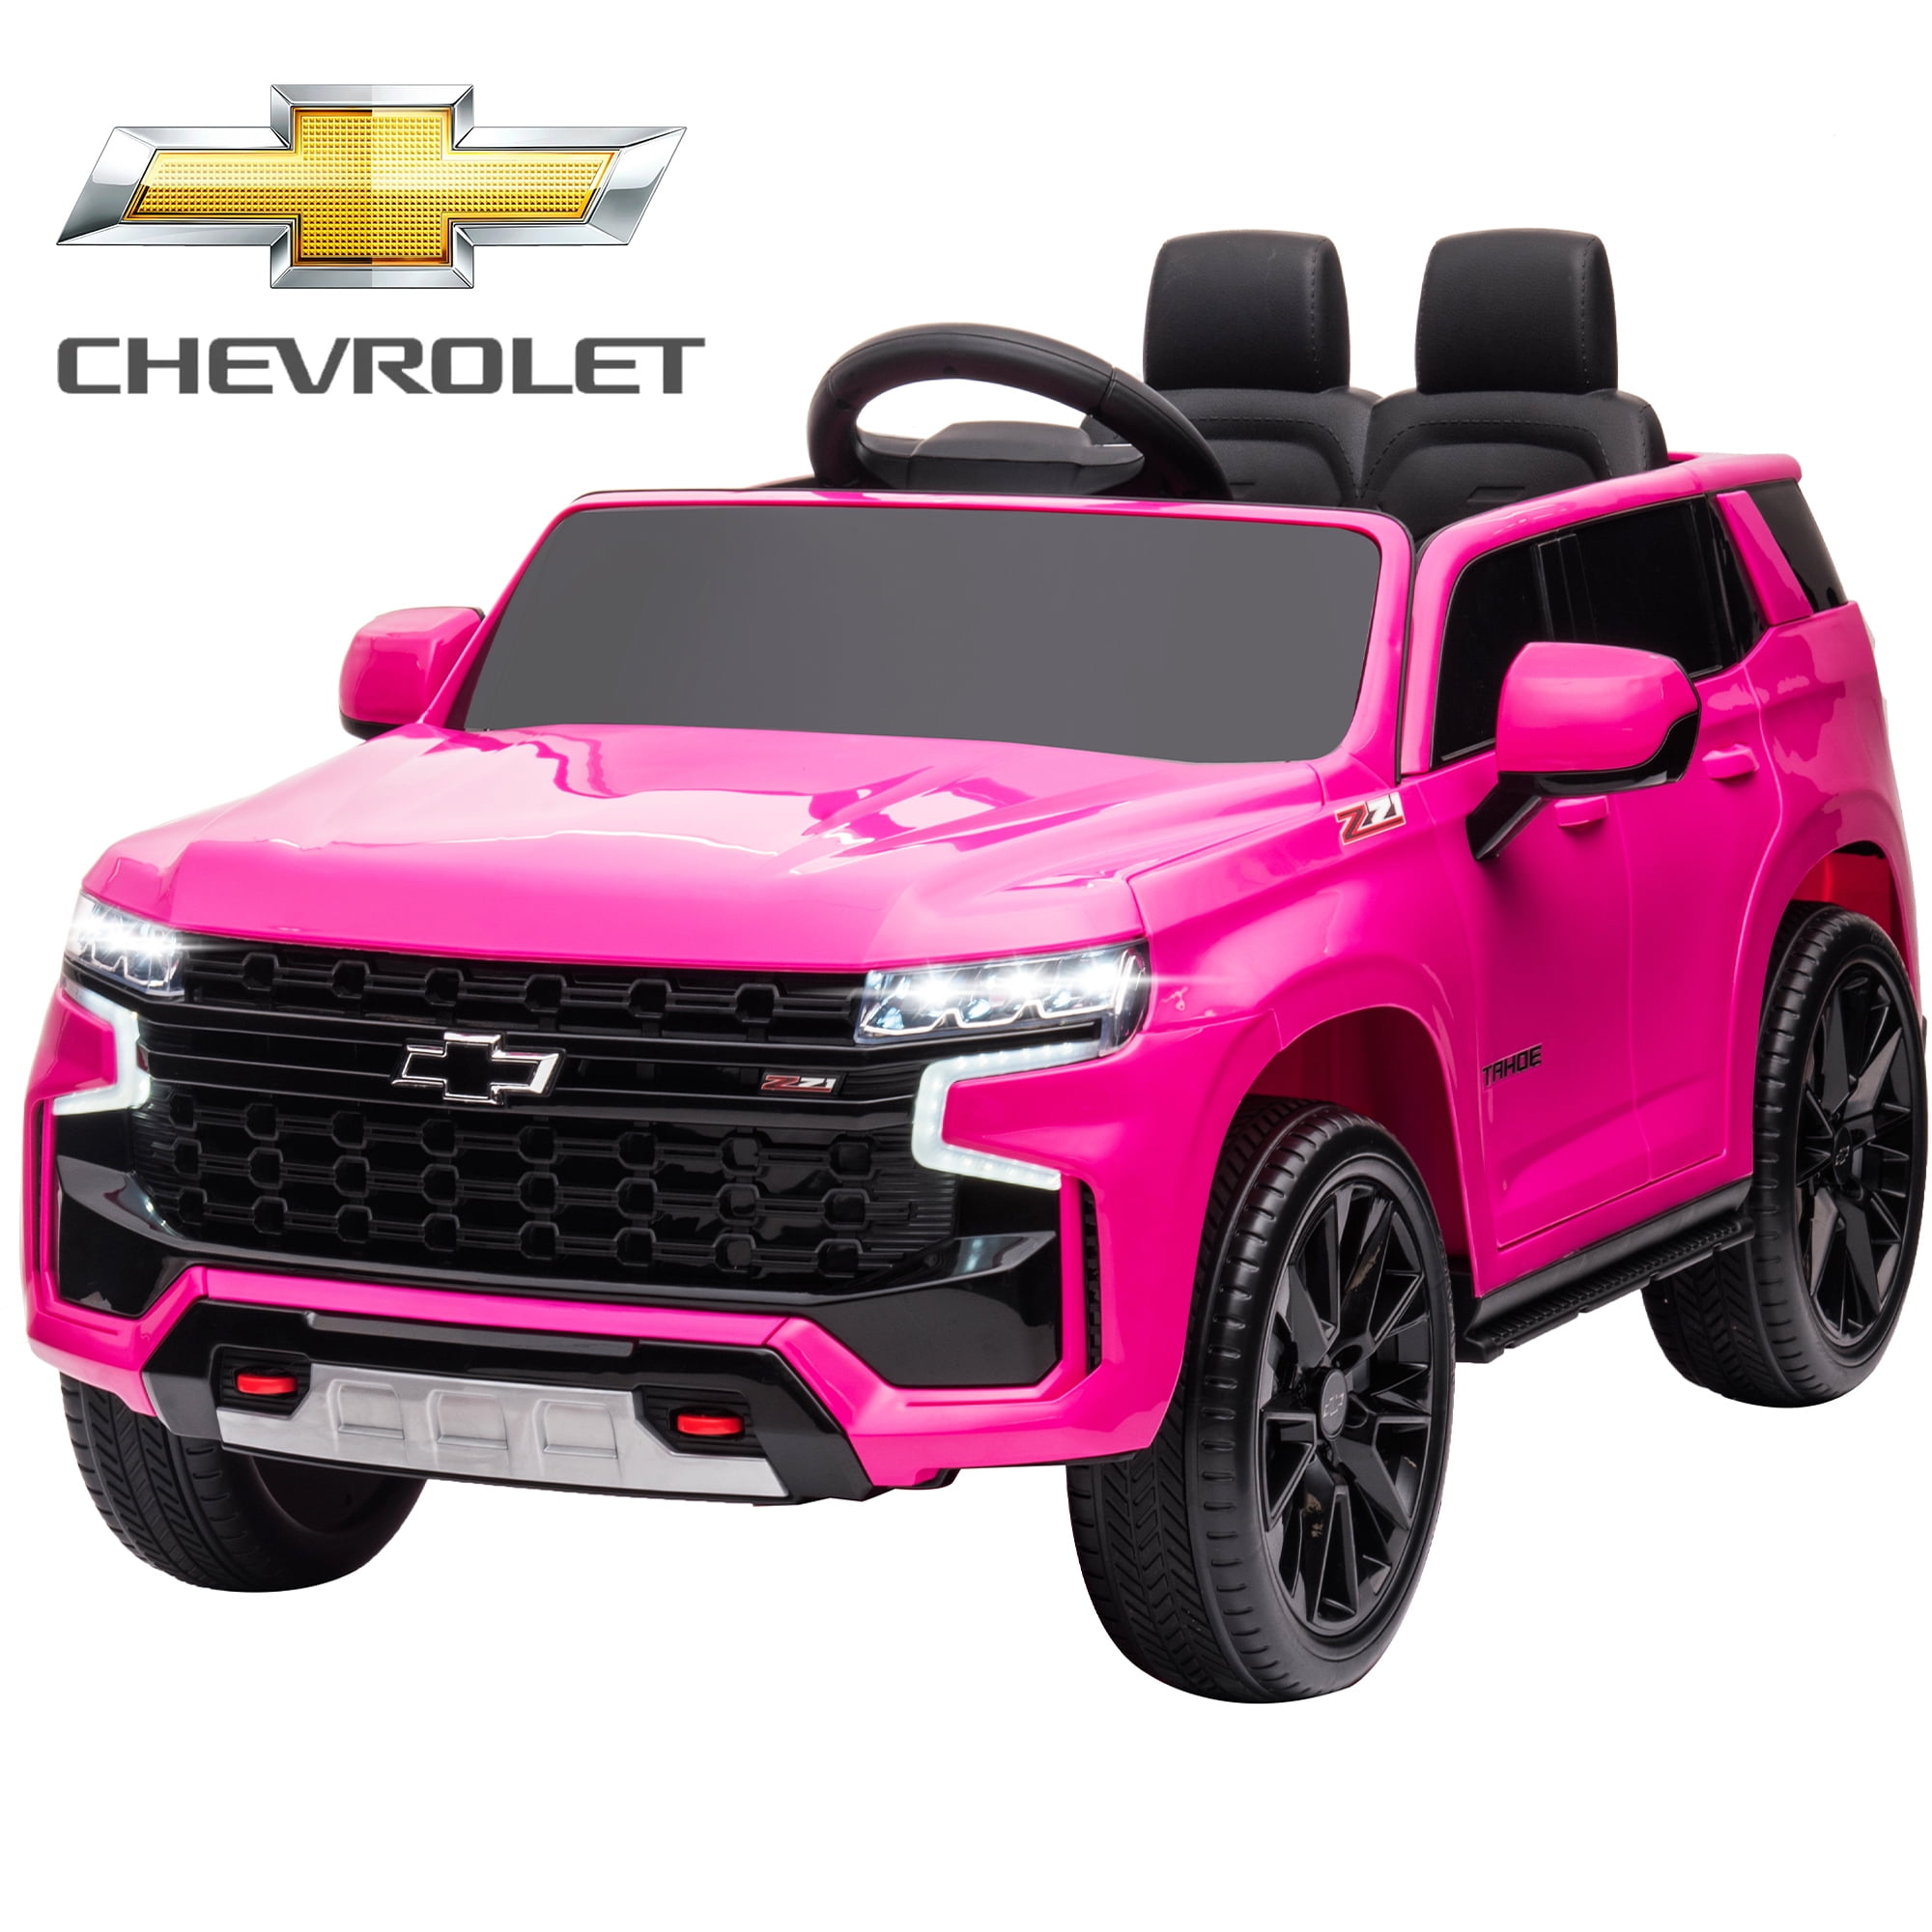 Chevrolet Tahoe Kids Ride on Car, 12V Powered Ride on Toy with Remote Control, 4 Wheels Suspension, Safety Belt, MP3 Player, LED Lights, Electric Vehicles for Boys Girls, Pink